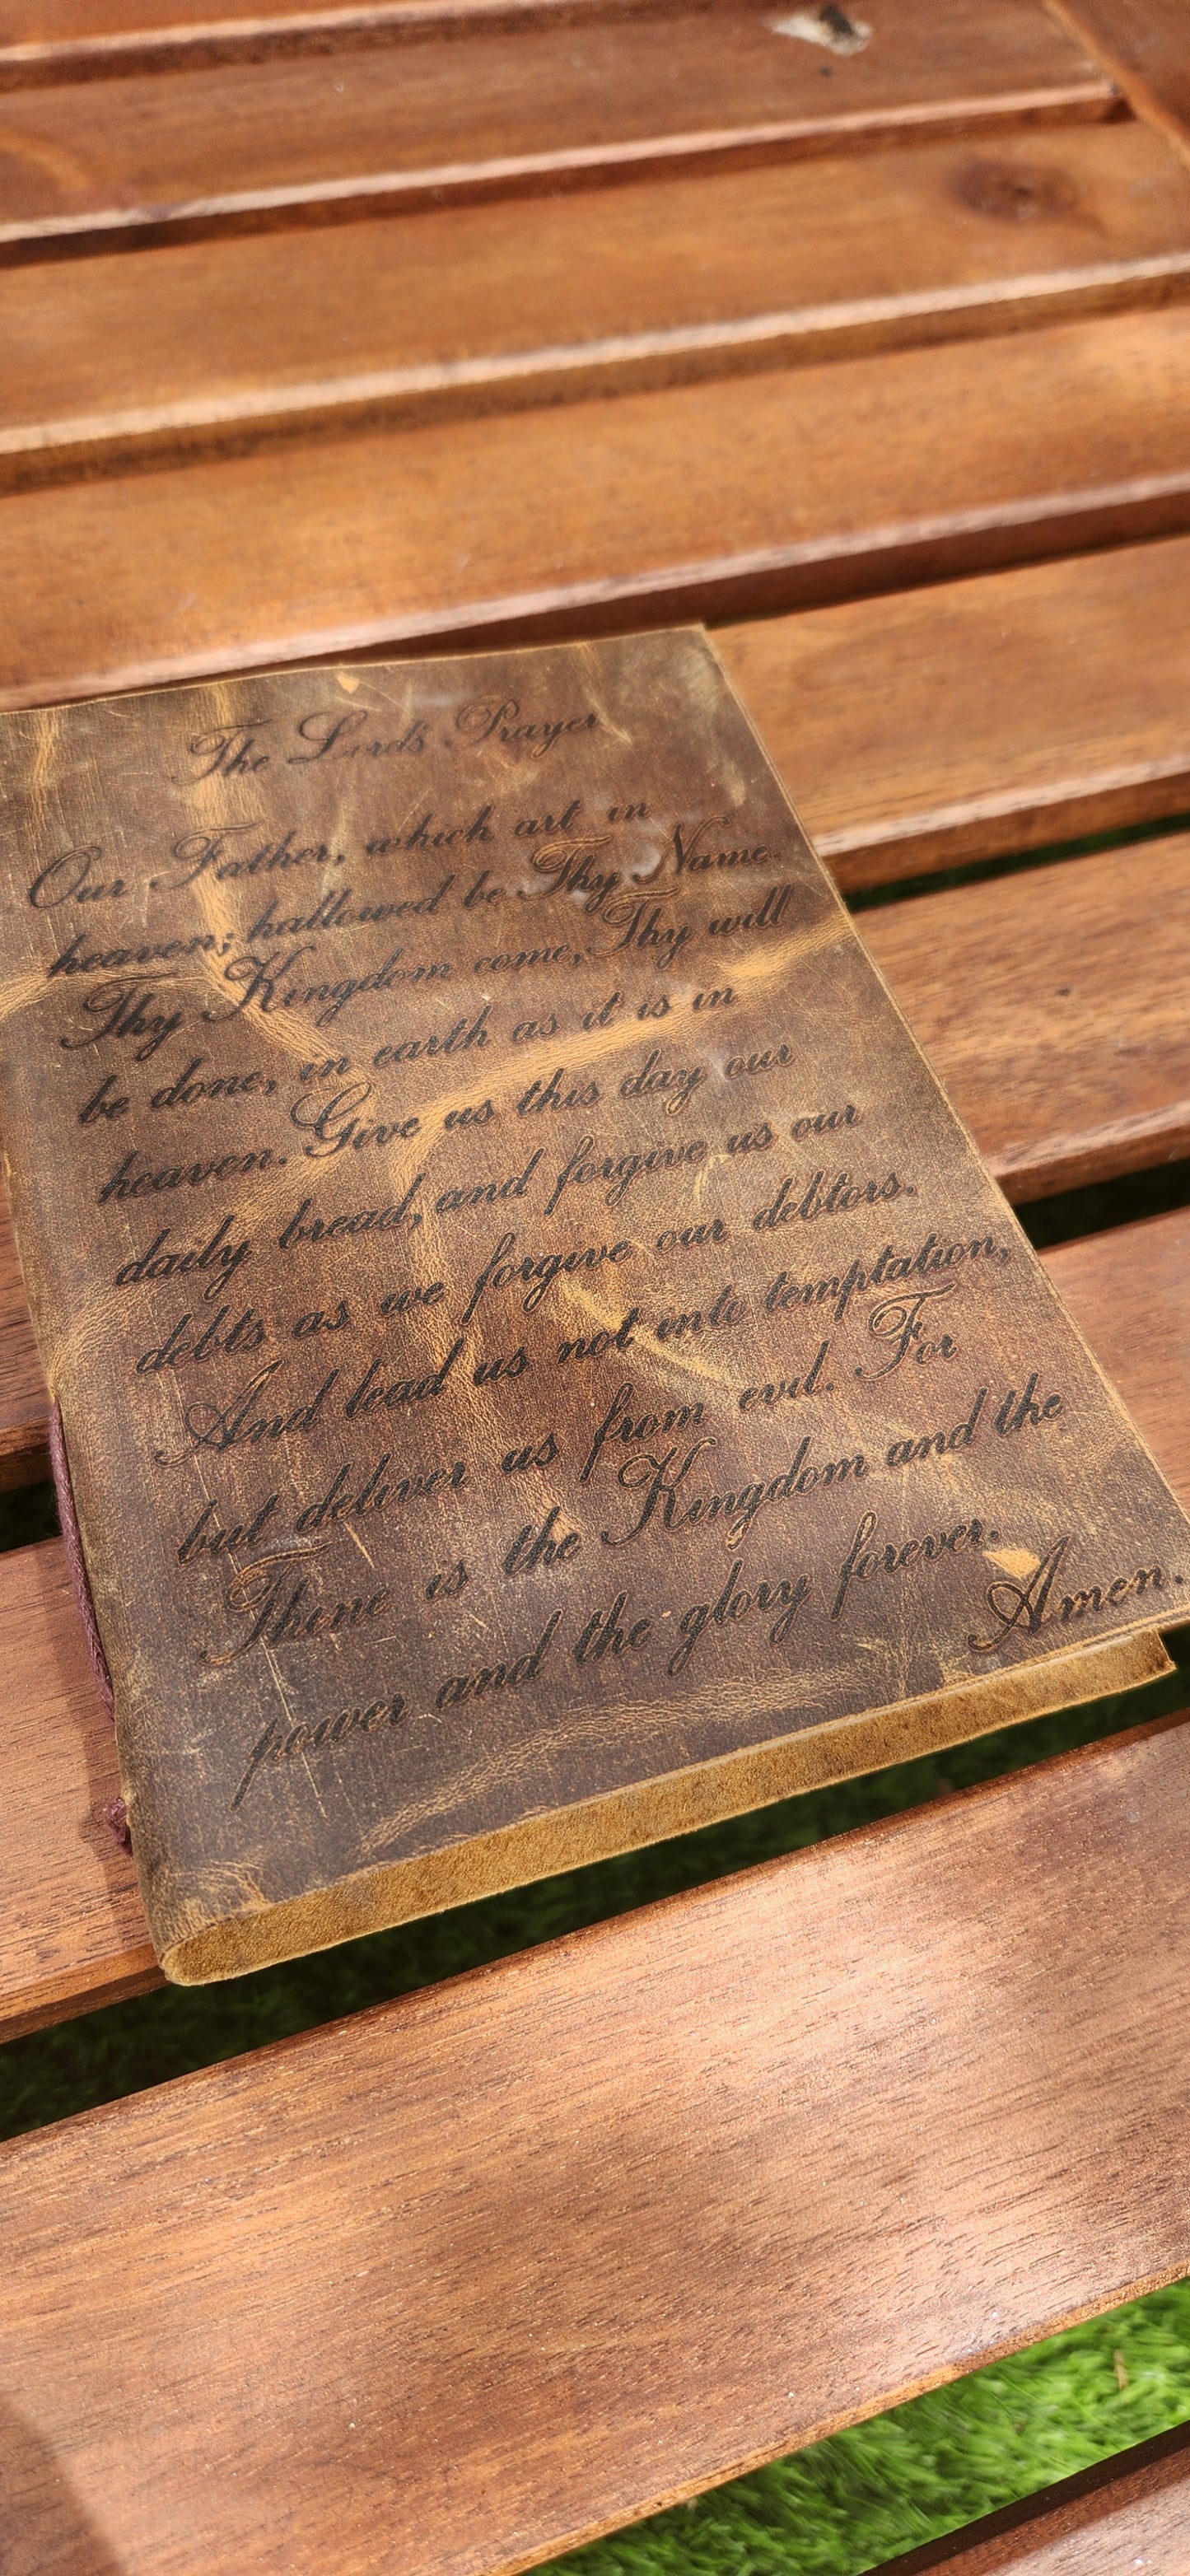 The Lord's Prayer leather Journal